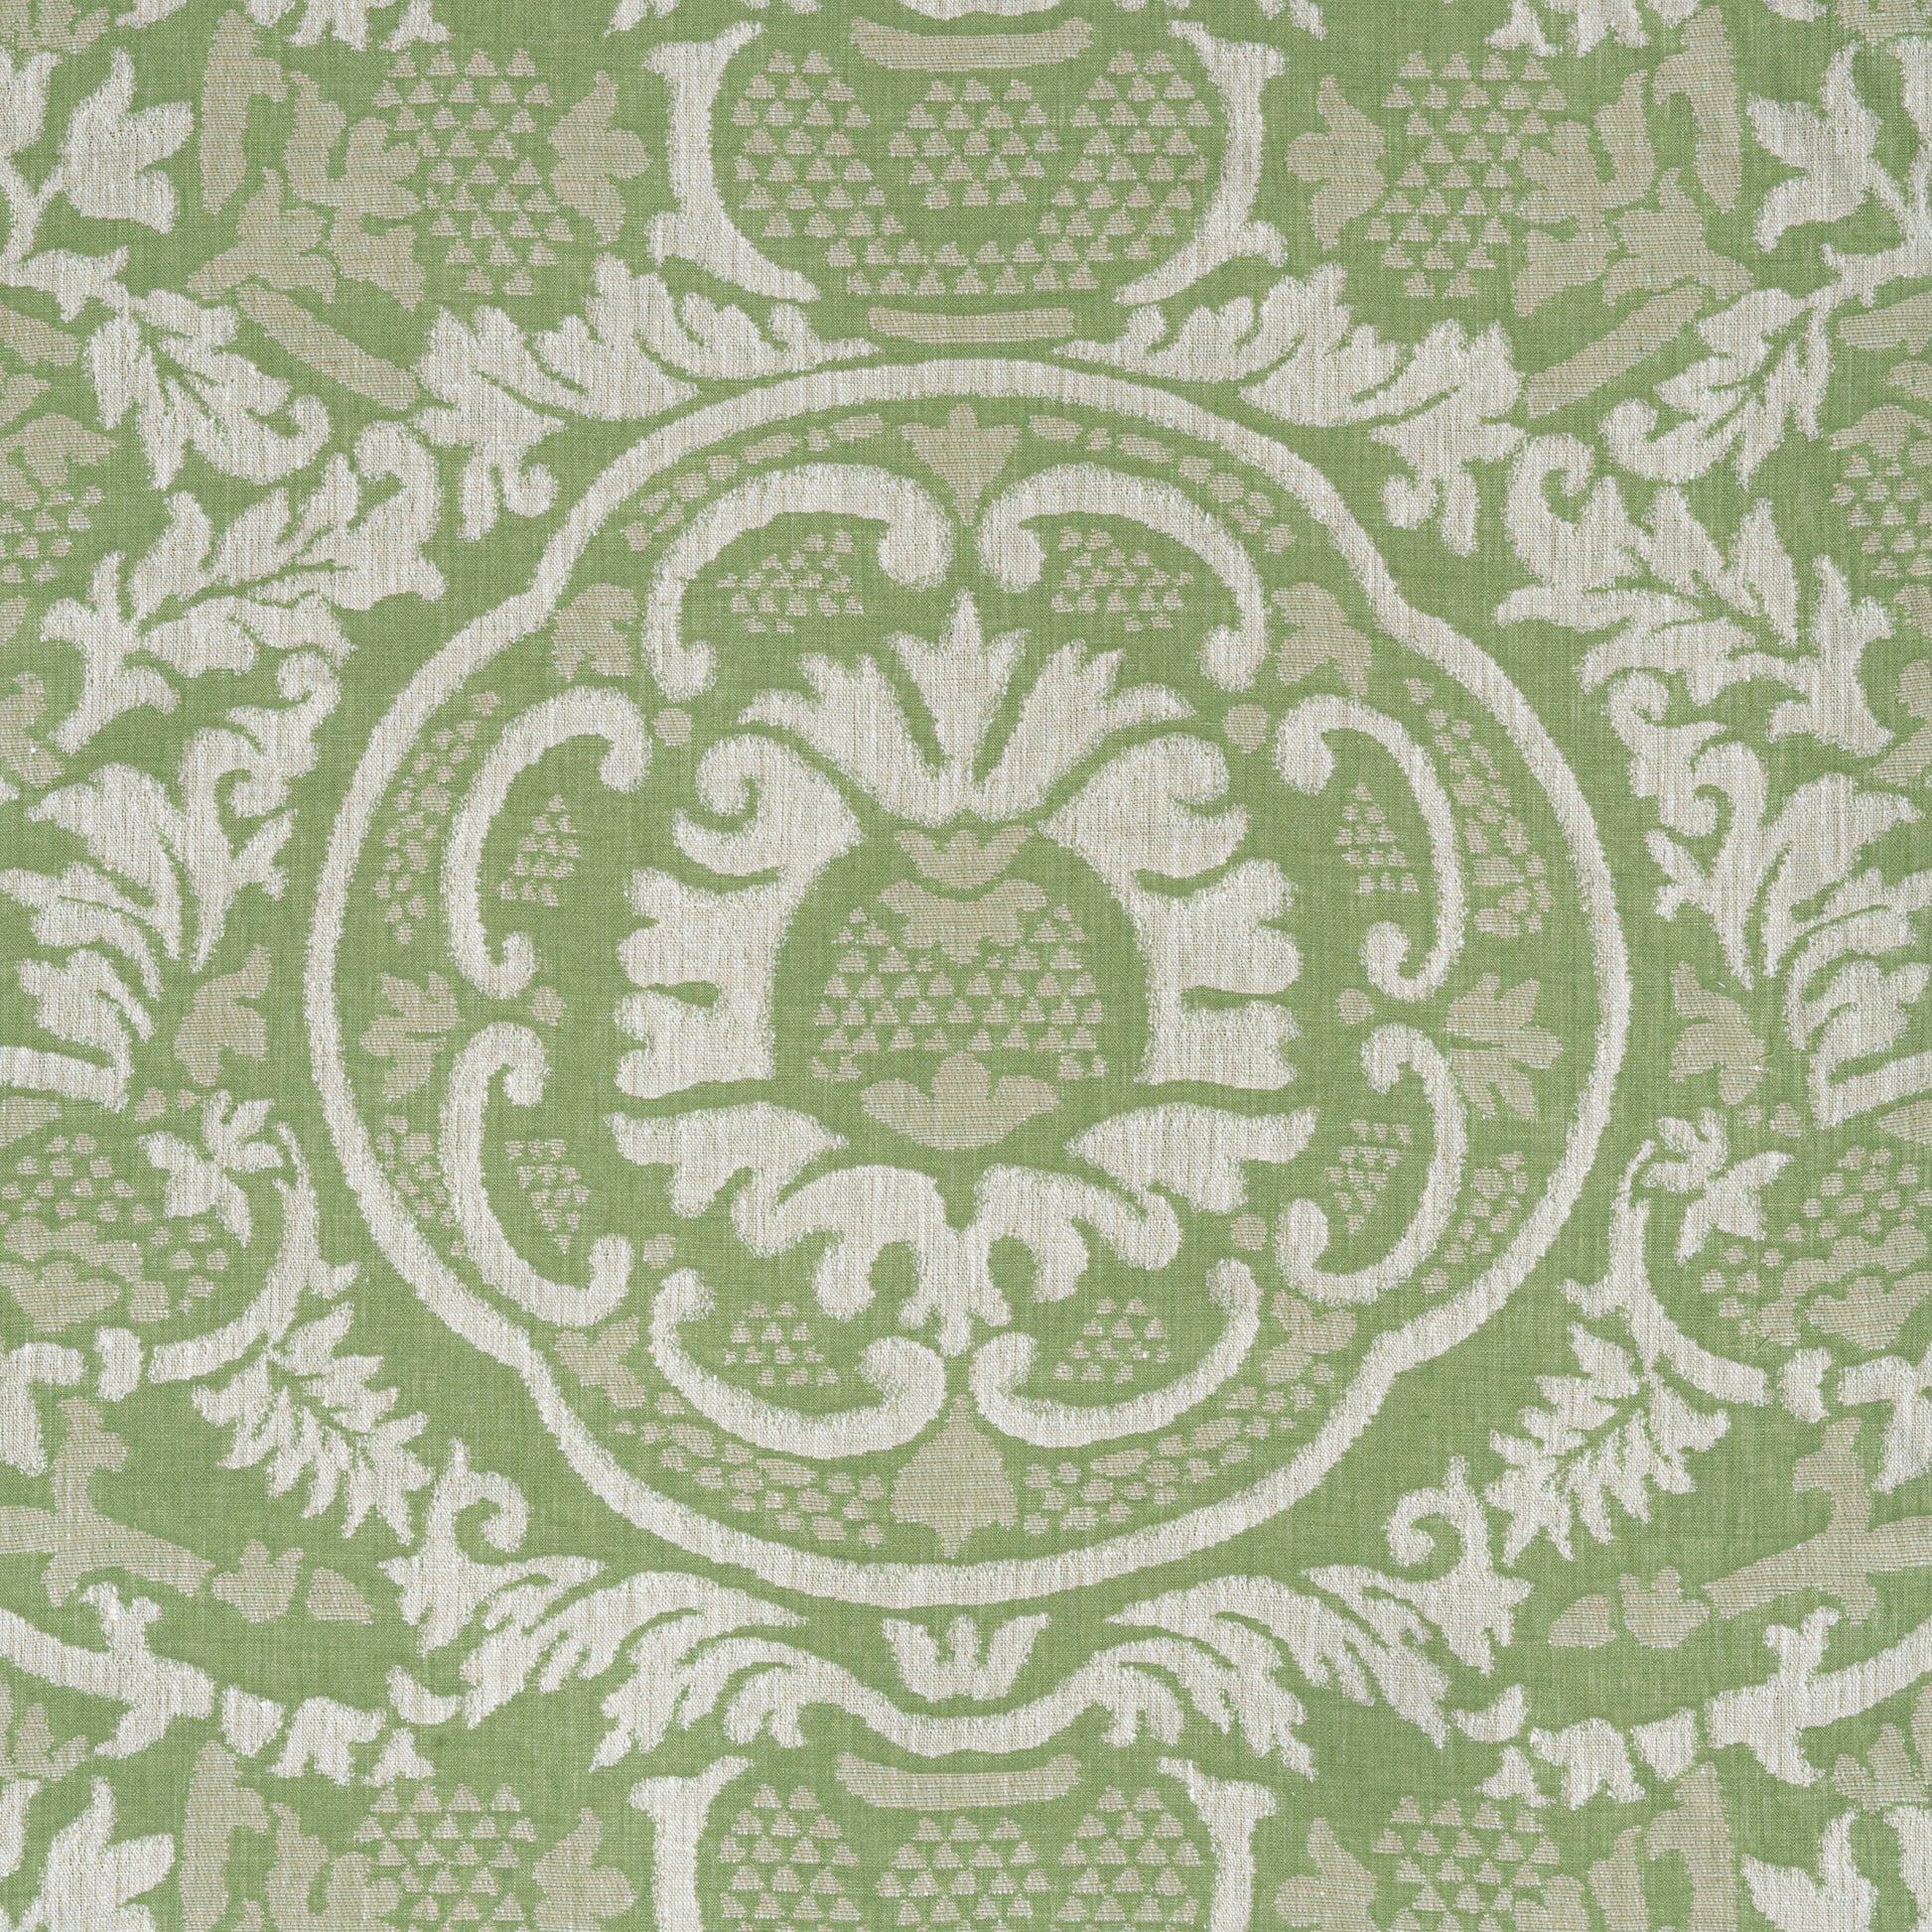 Purchase Thibaut Fabric SKU# W710838 pattern name Earl Damask color Green